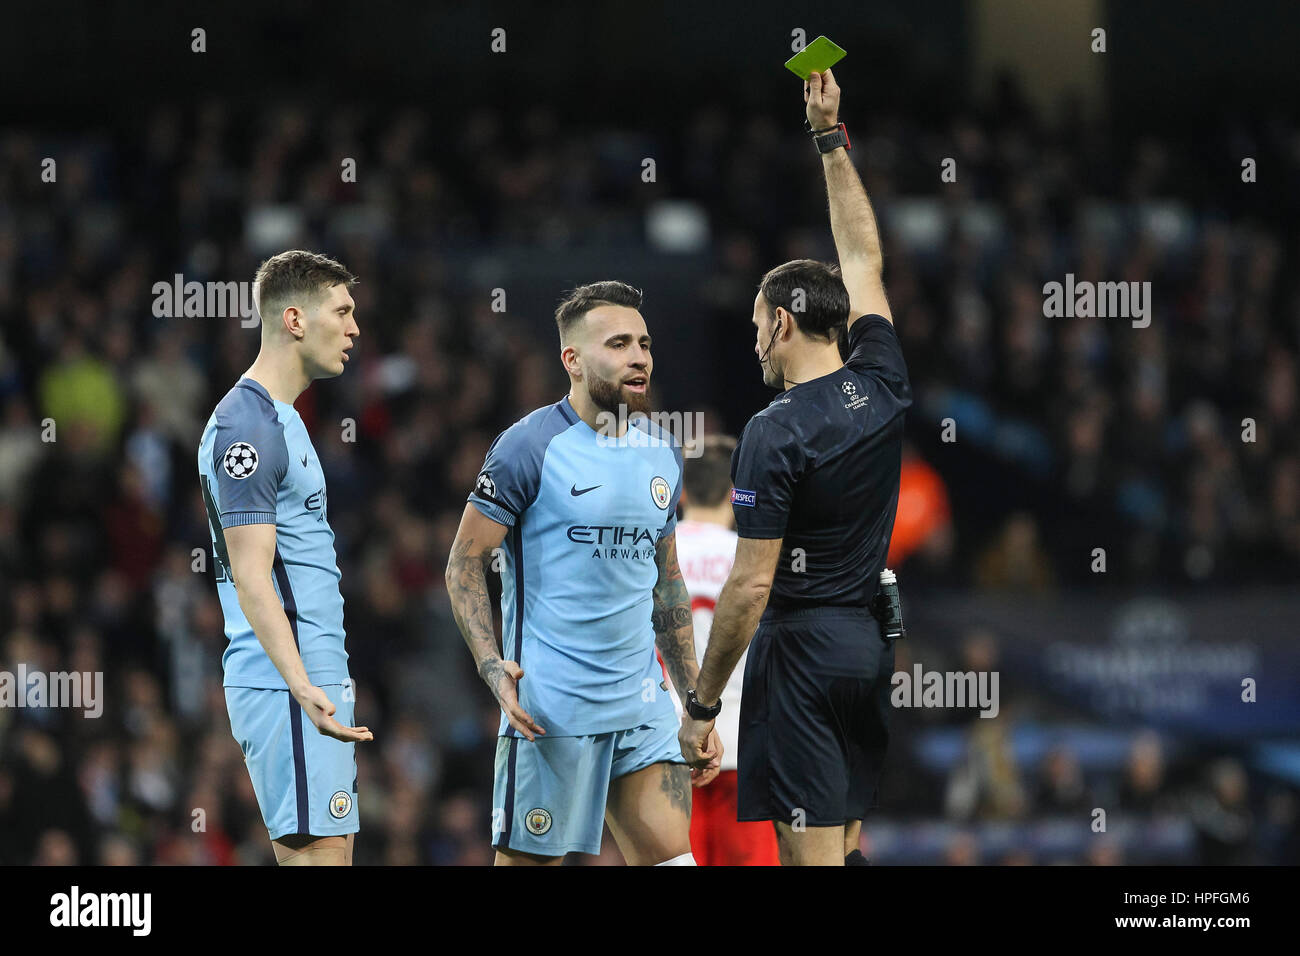 Manchester, UK. 21st Feb, 2017. Nicolas Otamendi of Manchester City is shown a yellow card by referee Antonio Mateu Lahoz during the UEFA Champions League Round of 16 first leg match between Manchester City and AS Monaco at the Etihad Stadium on February 21st 2017 in Manchester, England. Credit: PHC Images/Alamy Live News Stock Photo